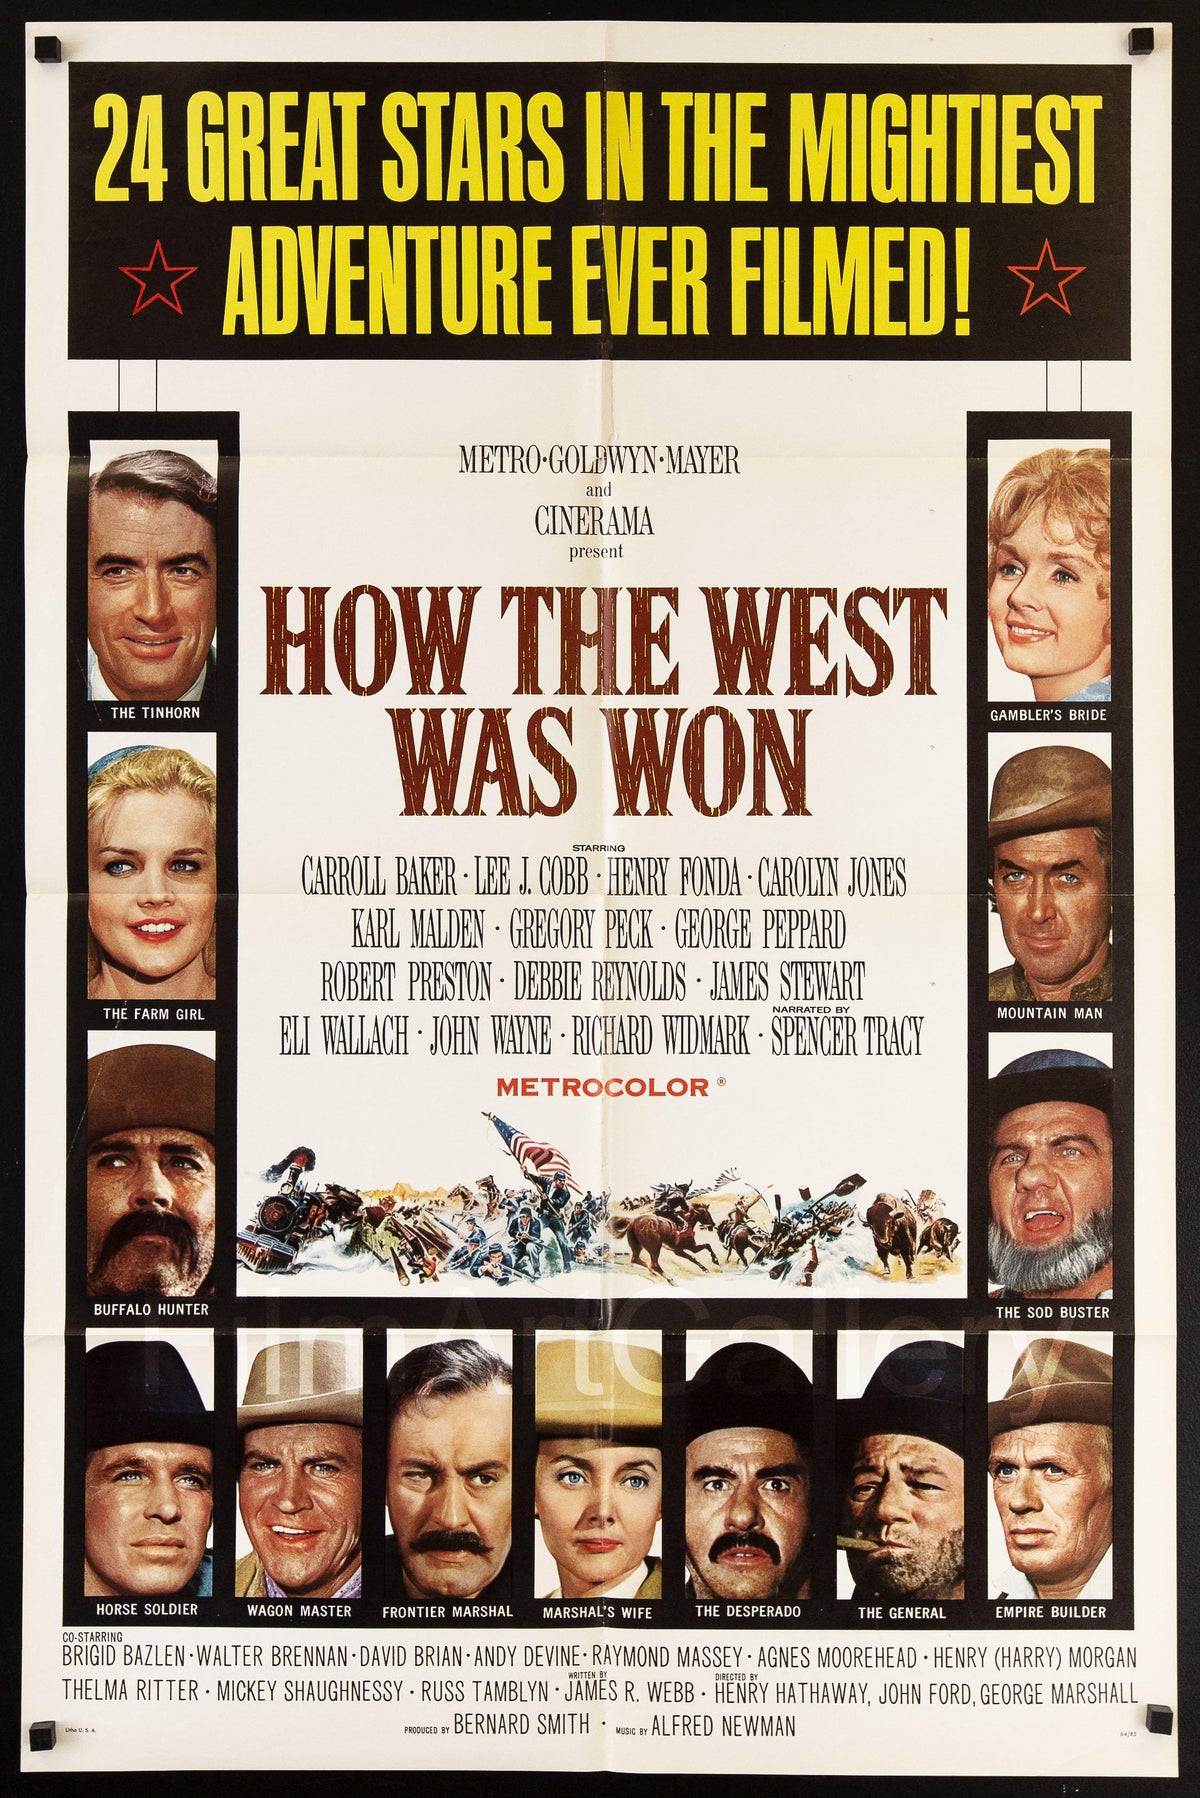 How the West Was Won 1 Sheet (27x41) Original Vintage Movie Poster